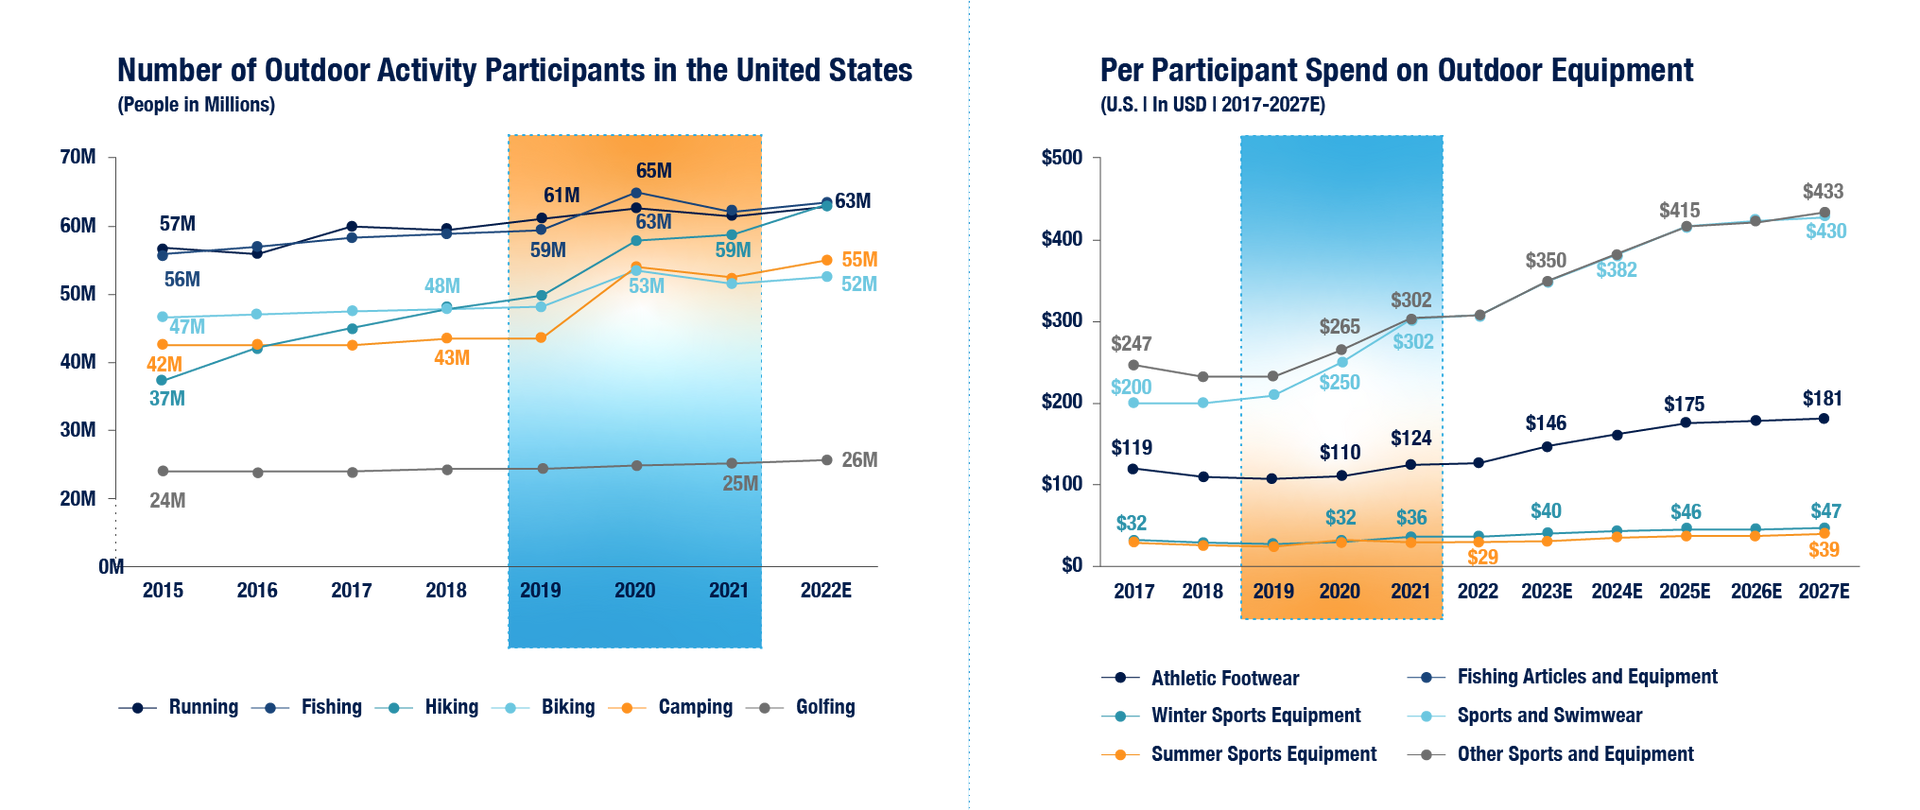 Graph A shows the number of outdoor activity participants in the US from 2015-2022. Graph B shows per participant spend on outdoor equipment from 2017-2027. Both graphs show trends for different types of outdoor activities and equipment, and both show overall positive trends. 